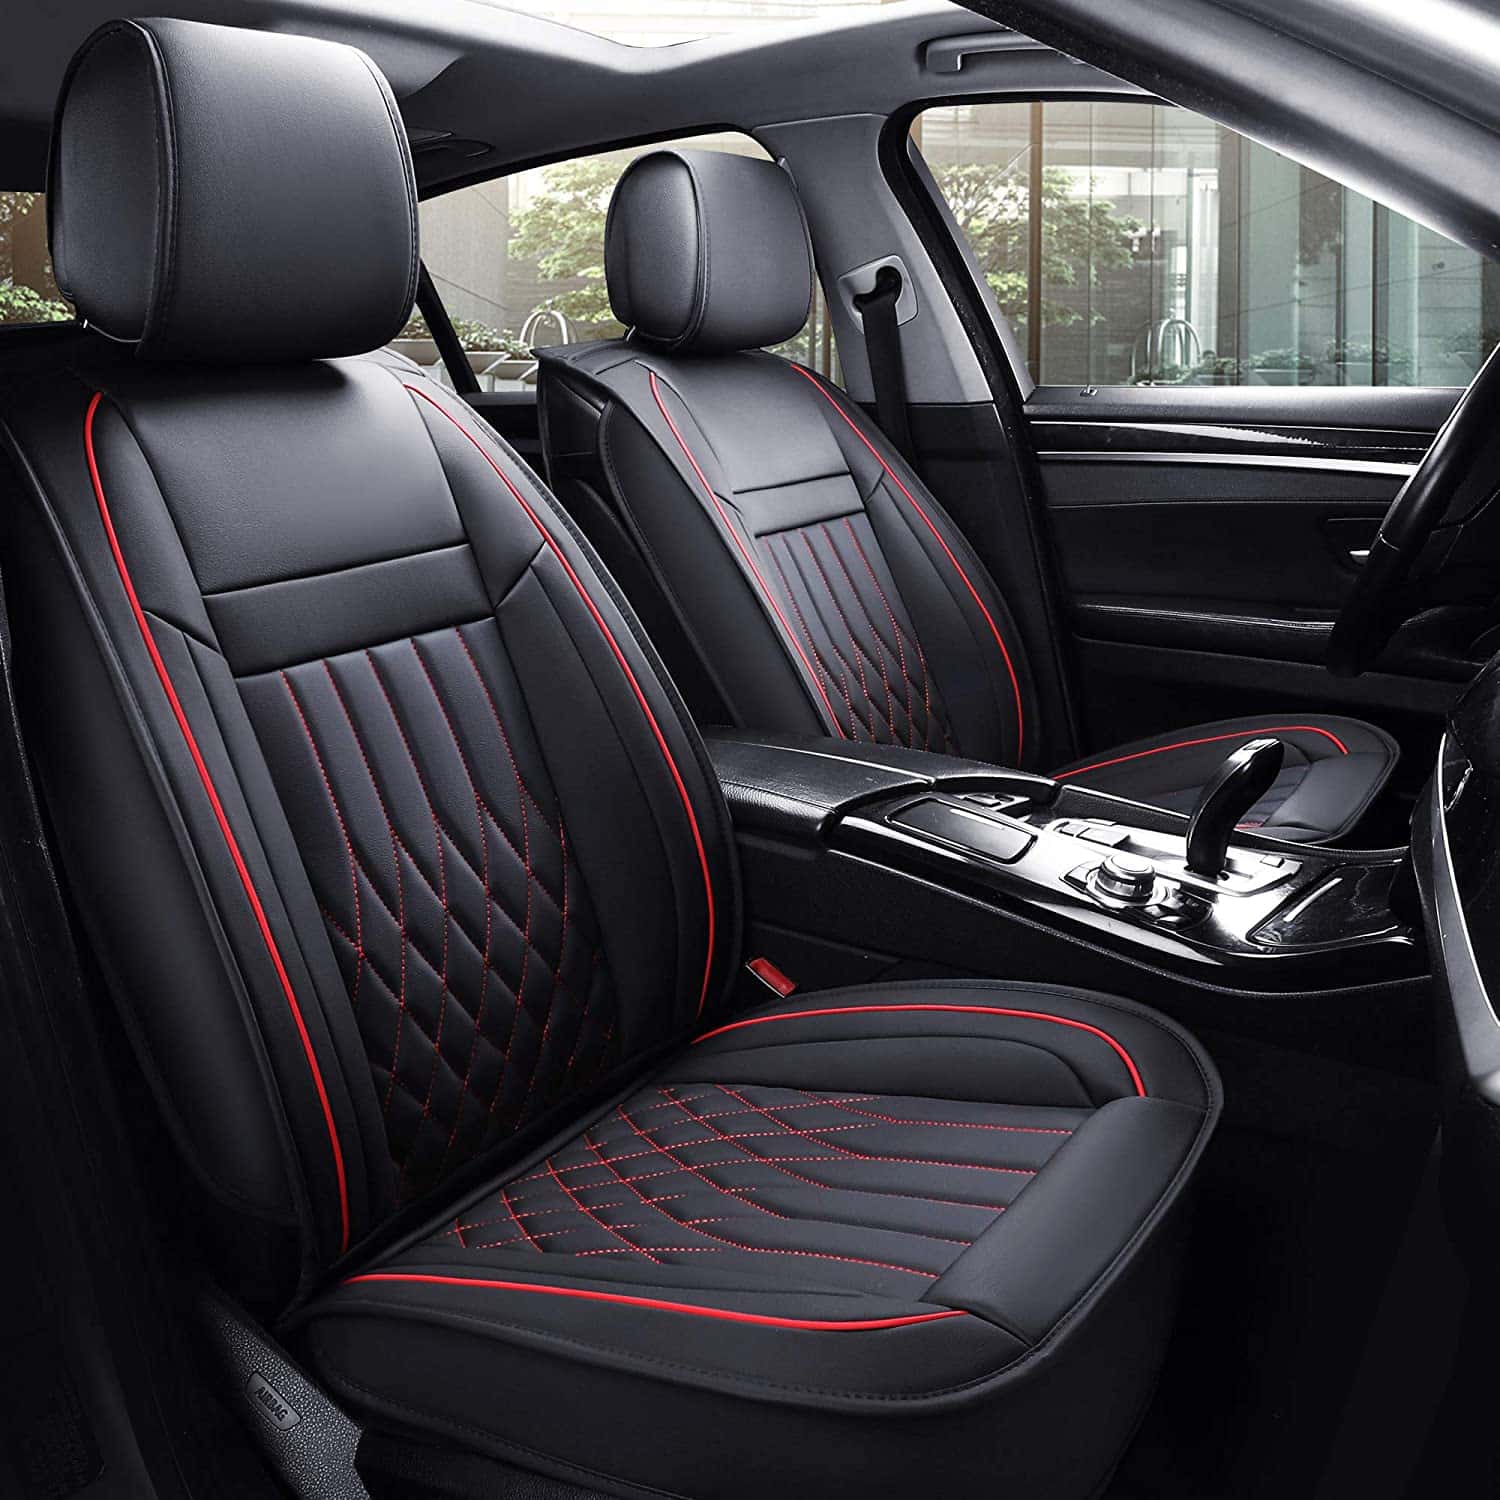 The 10 Best Leather Car Seat Covers in 2021 Reviews - Go On Products